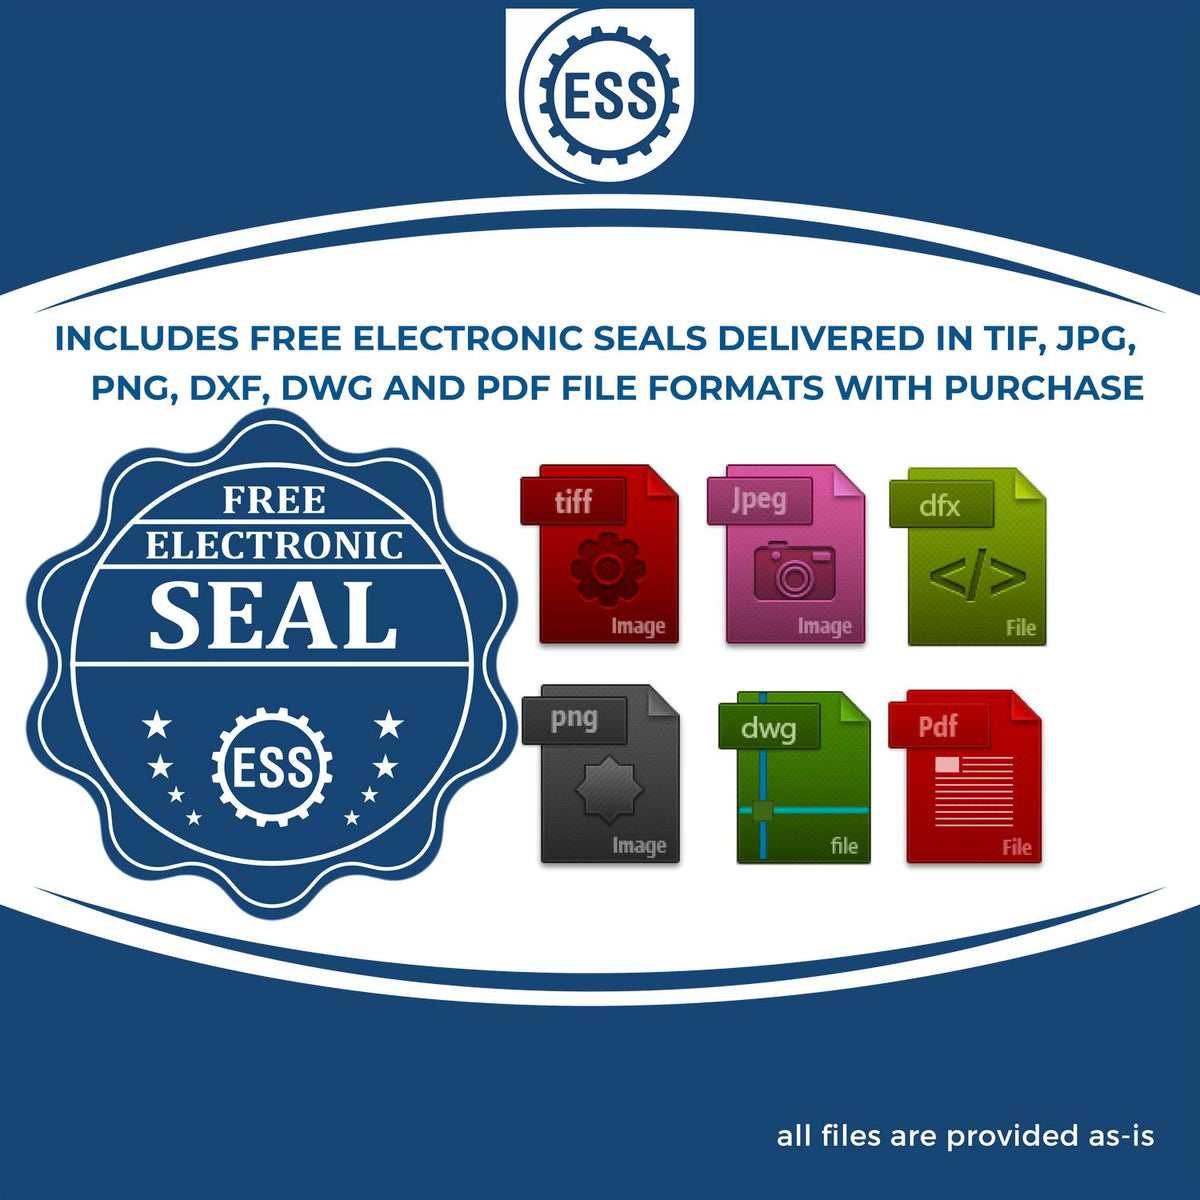 An infographic for the free electronic seal for the Long Reach South Dakota PE Seal illustrating the different file type icons such as DXF, DWG, TIF, JPG and PNG.